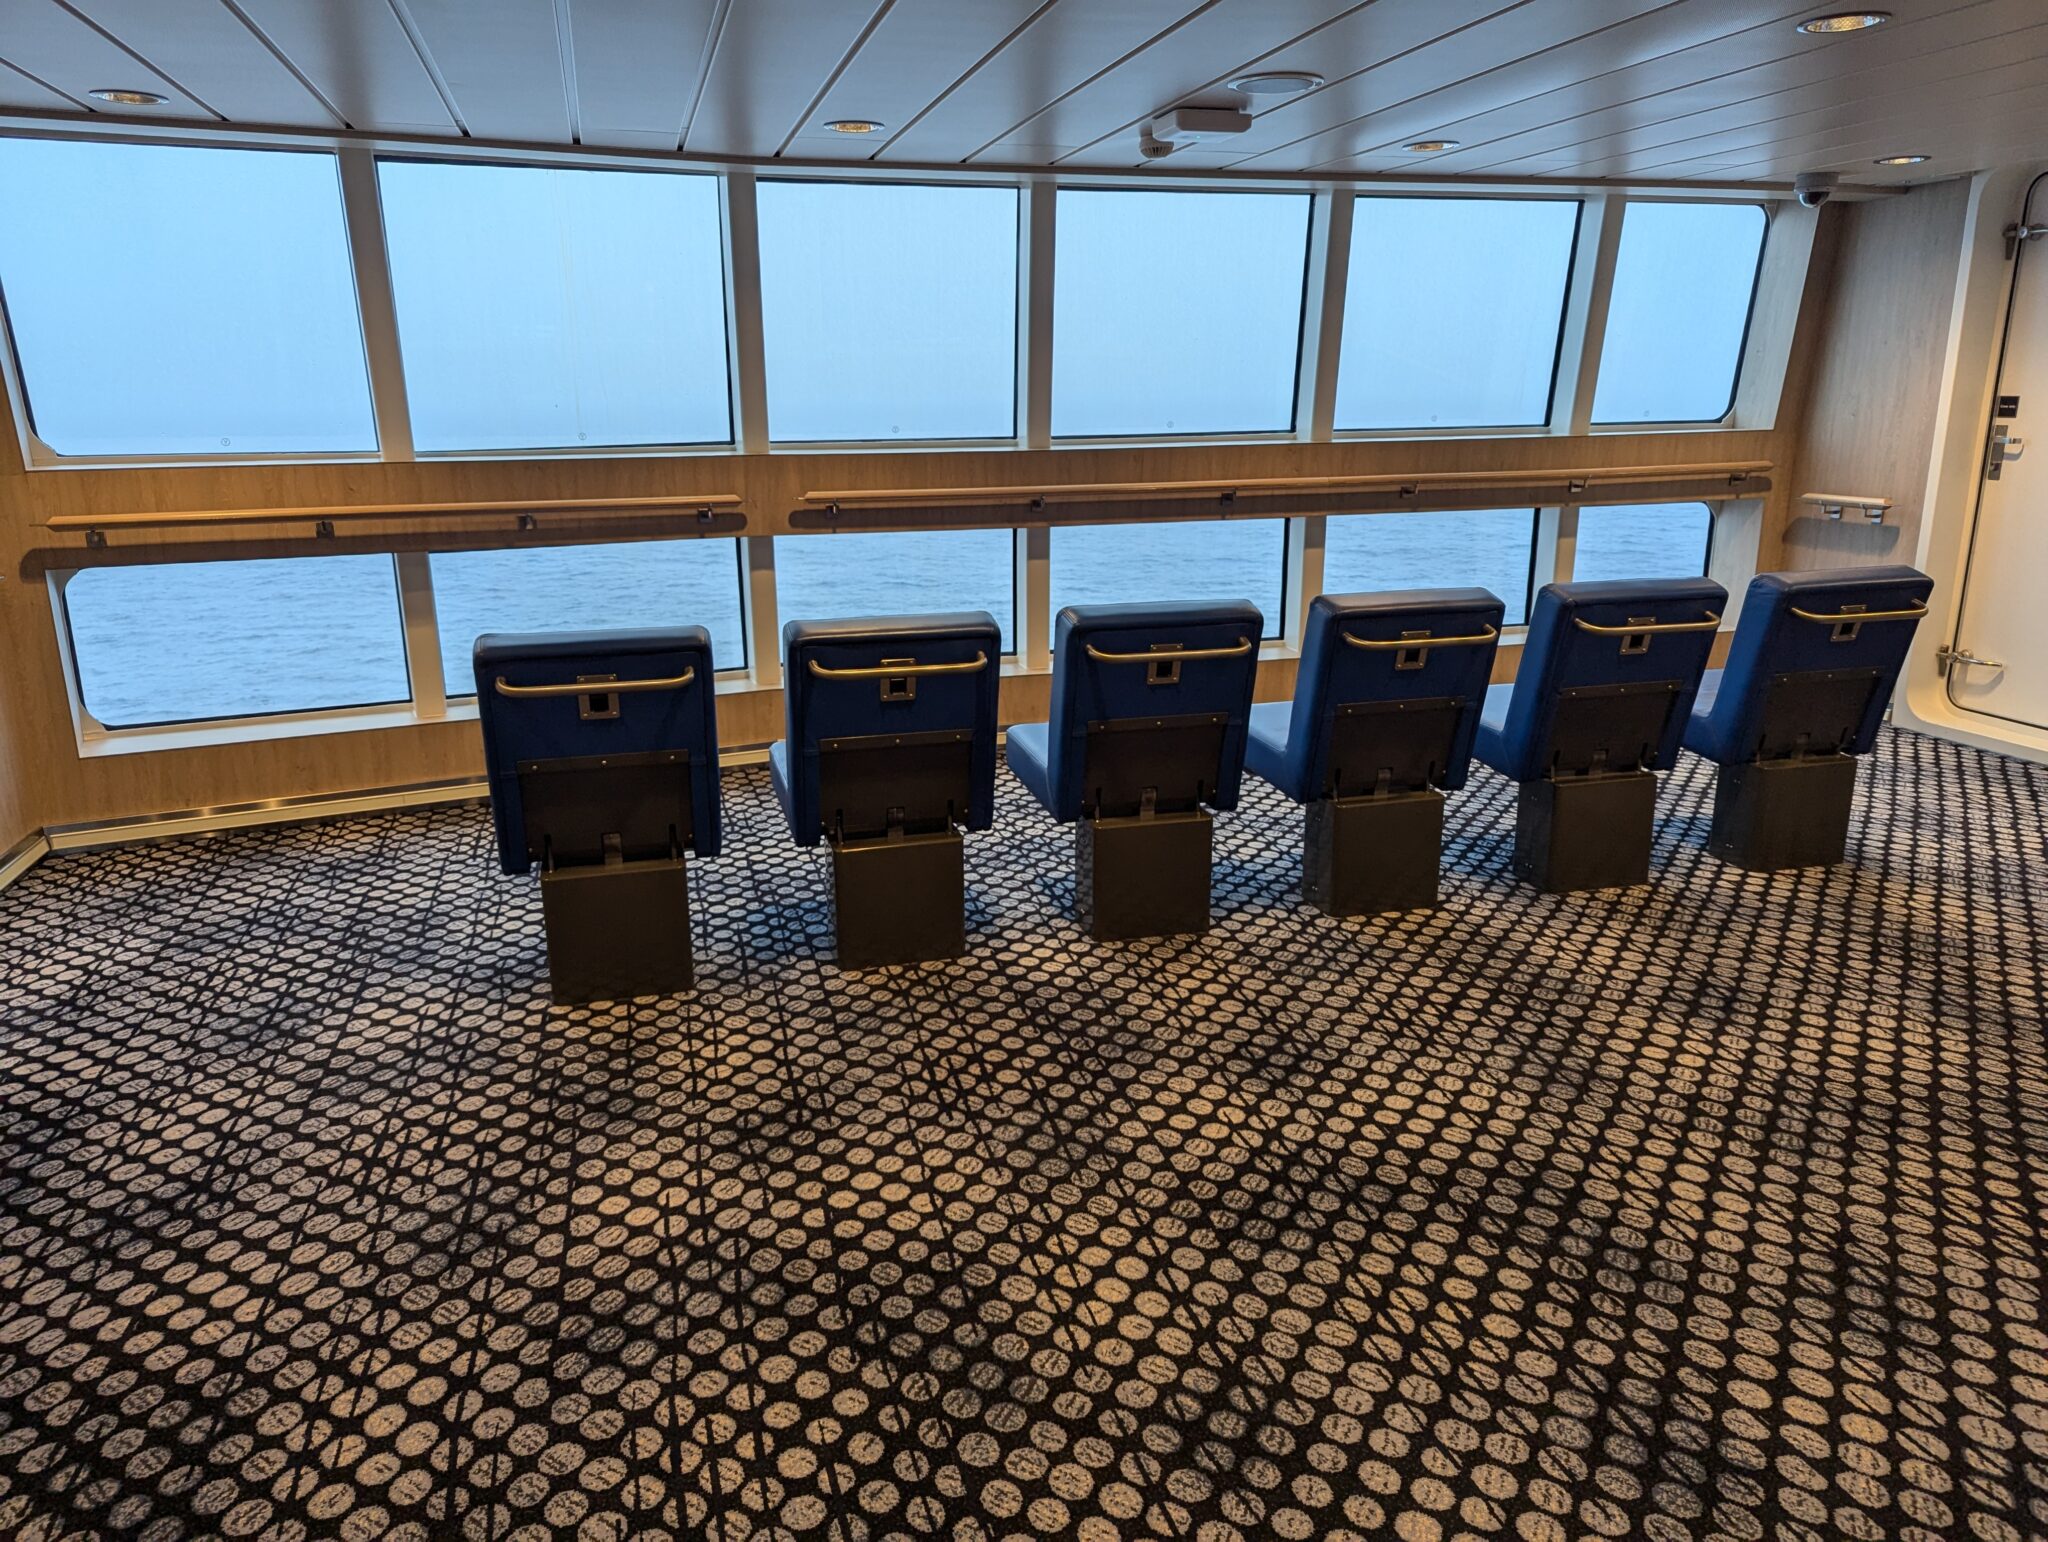 a row of chairs in a room with windows